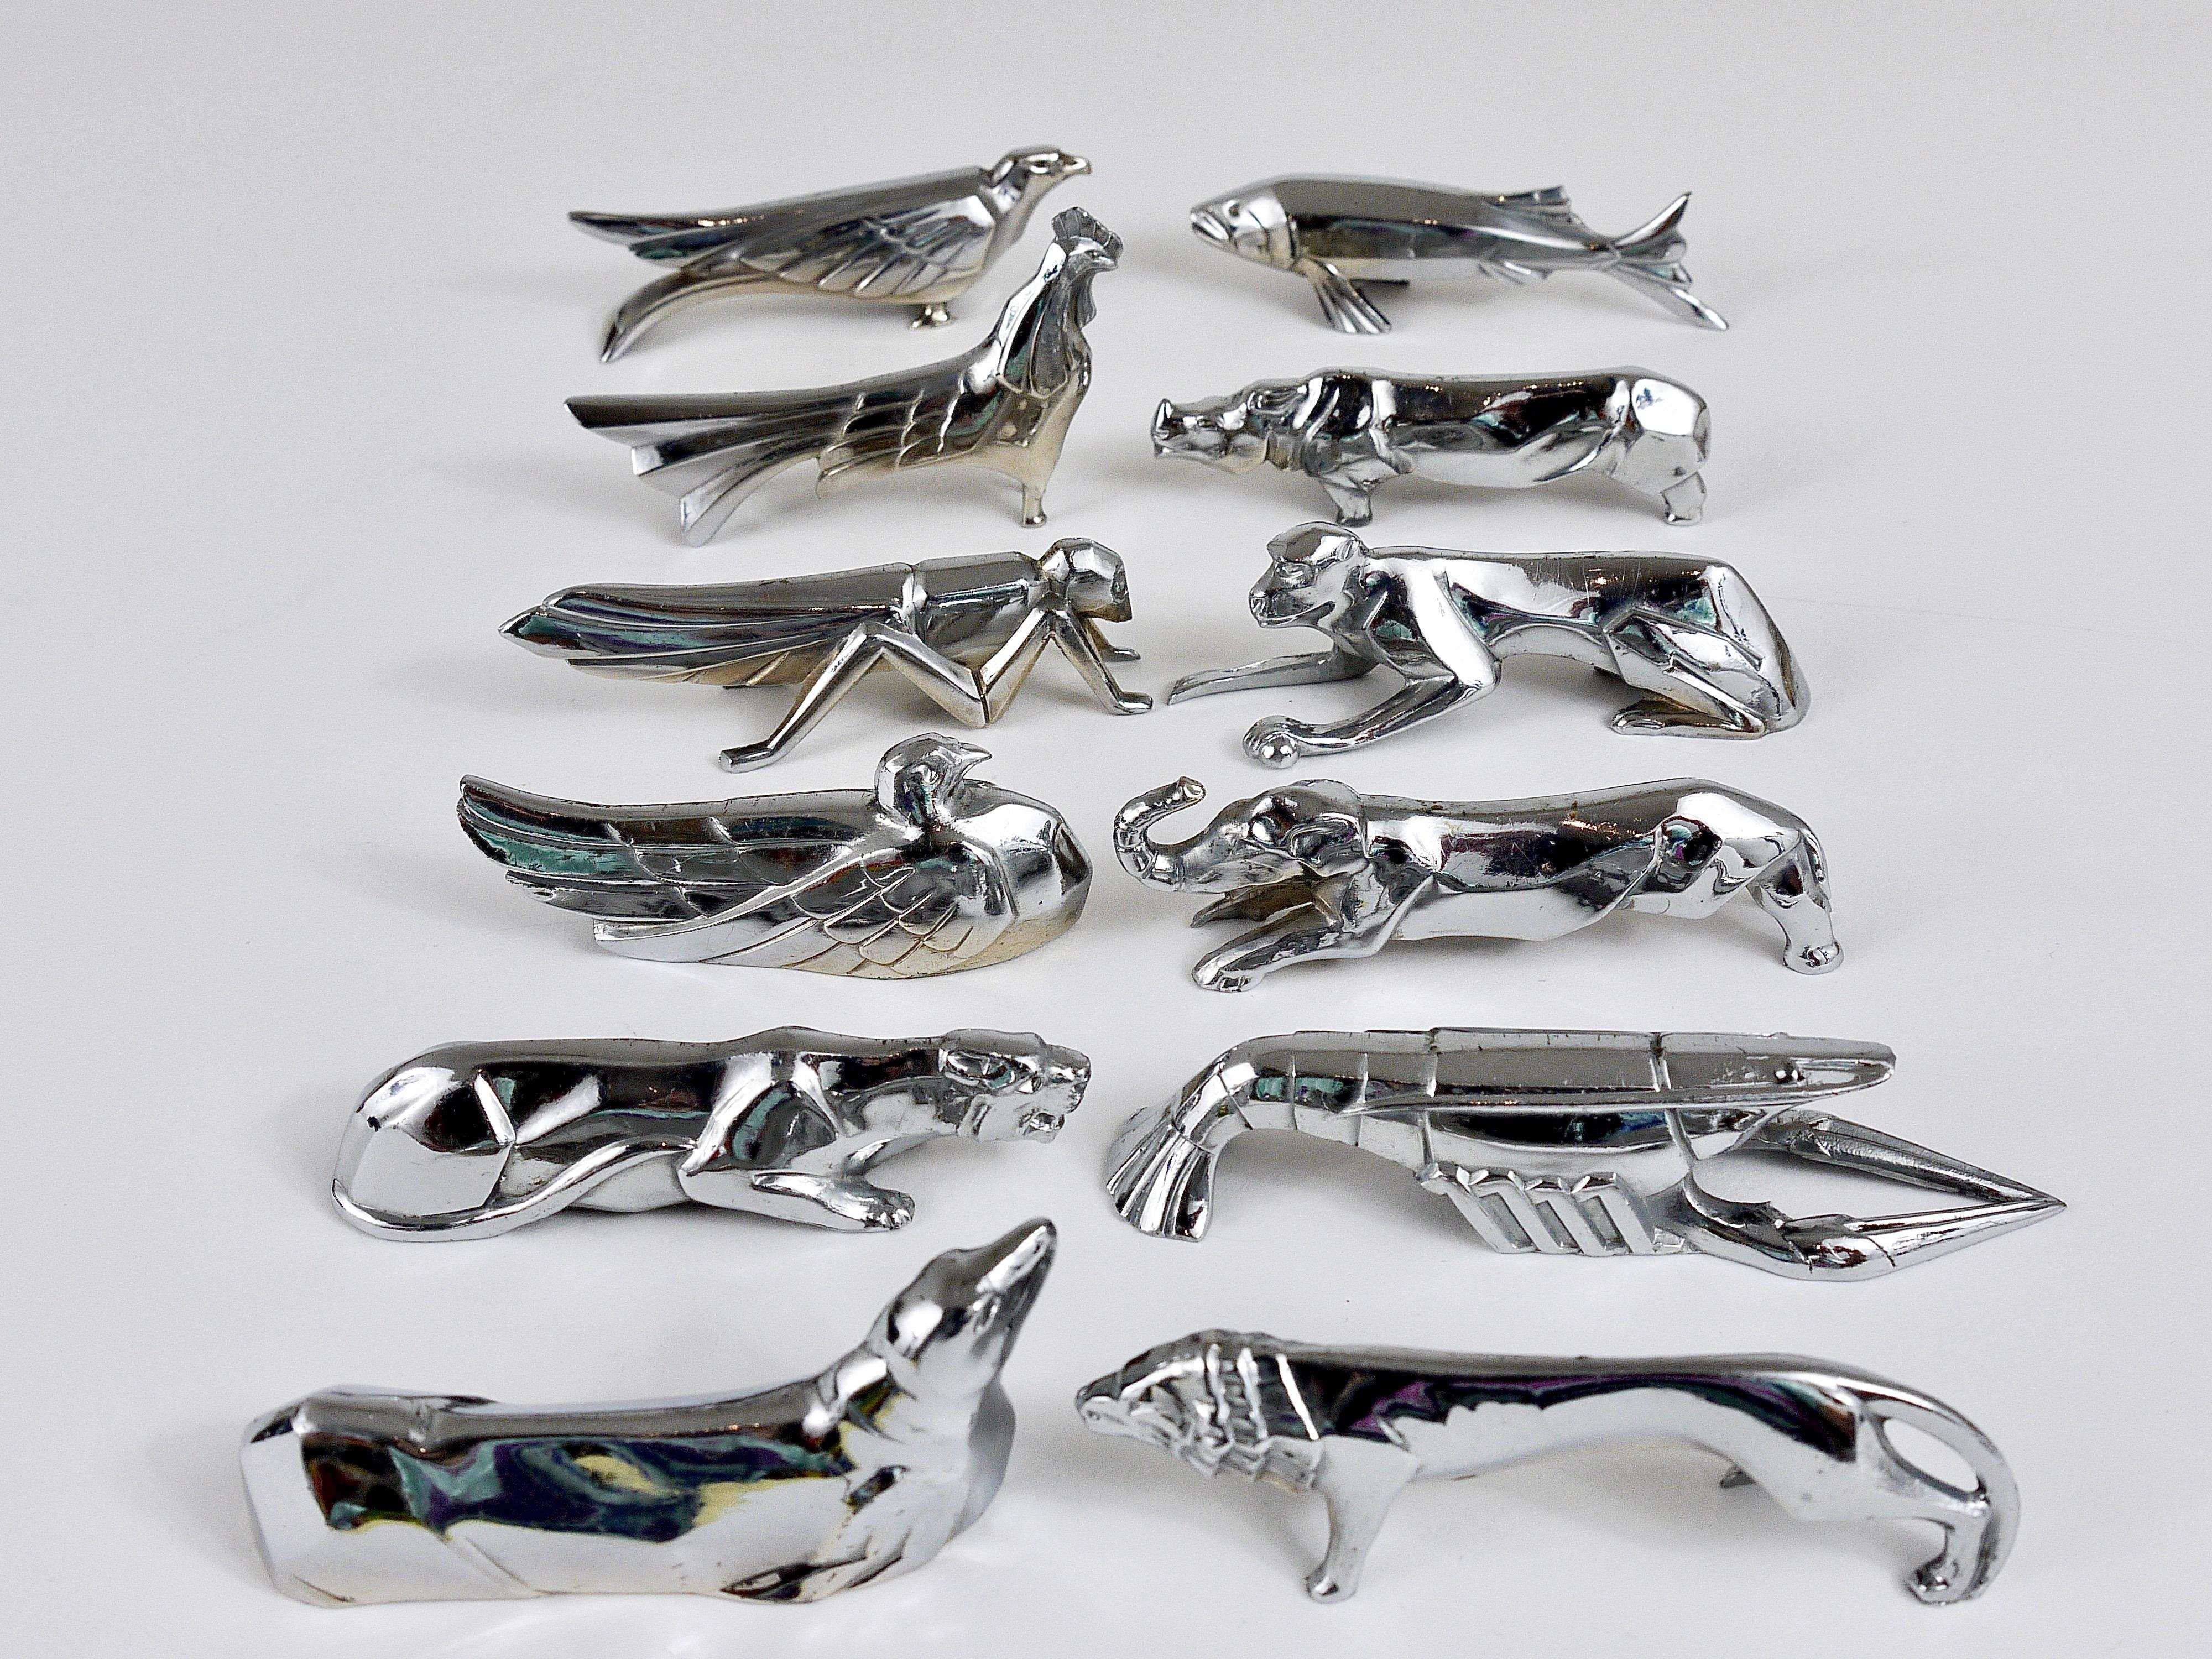 A set of 12 charming nickel-plated animal sculpture knife rests, displaying a rooster, a sea lion, a monkey, a lobster, a grasshopper, a rhino, an elephant, a lion, a fish, an eagle, a pigeon and a panther. Made in France in the 1930s. In very good